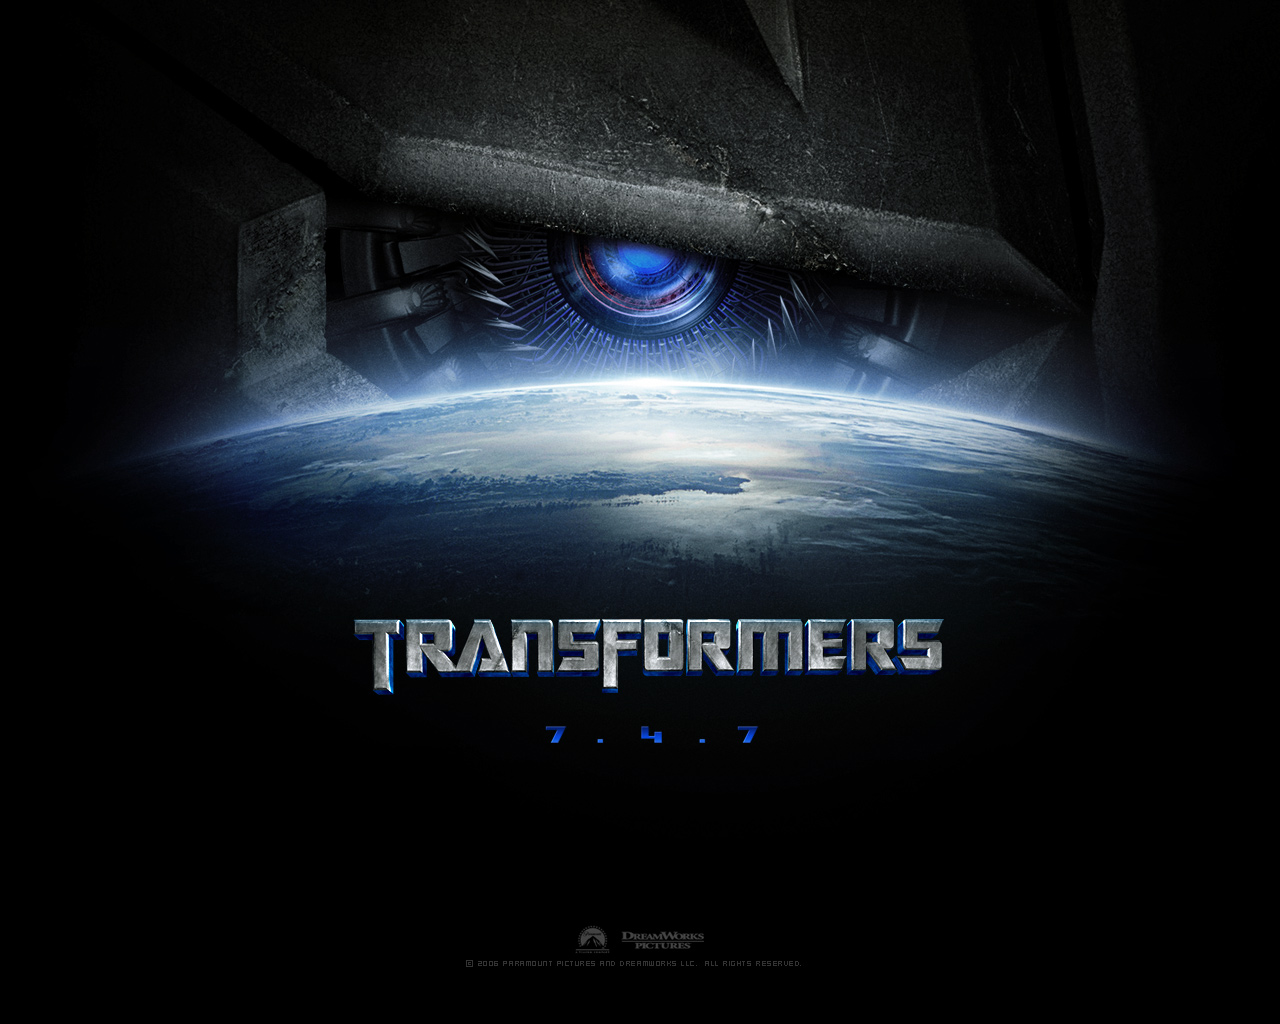  Transformers 3 Trailer Transformers 3 movie reviews wallpapers